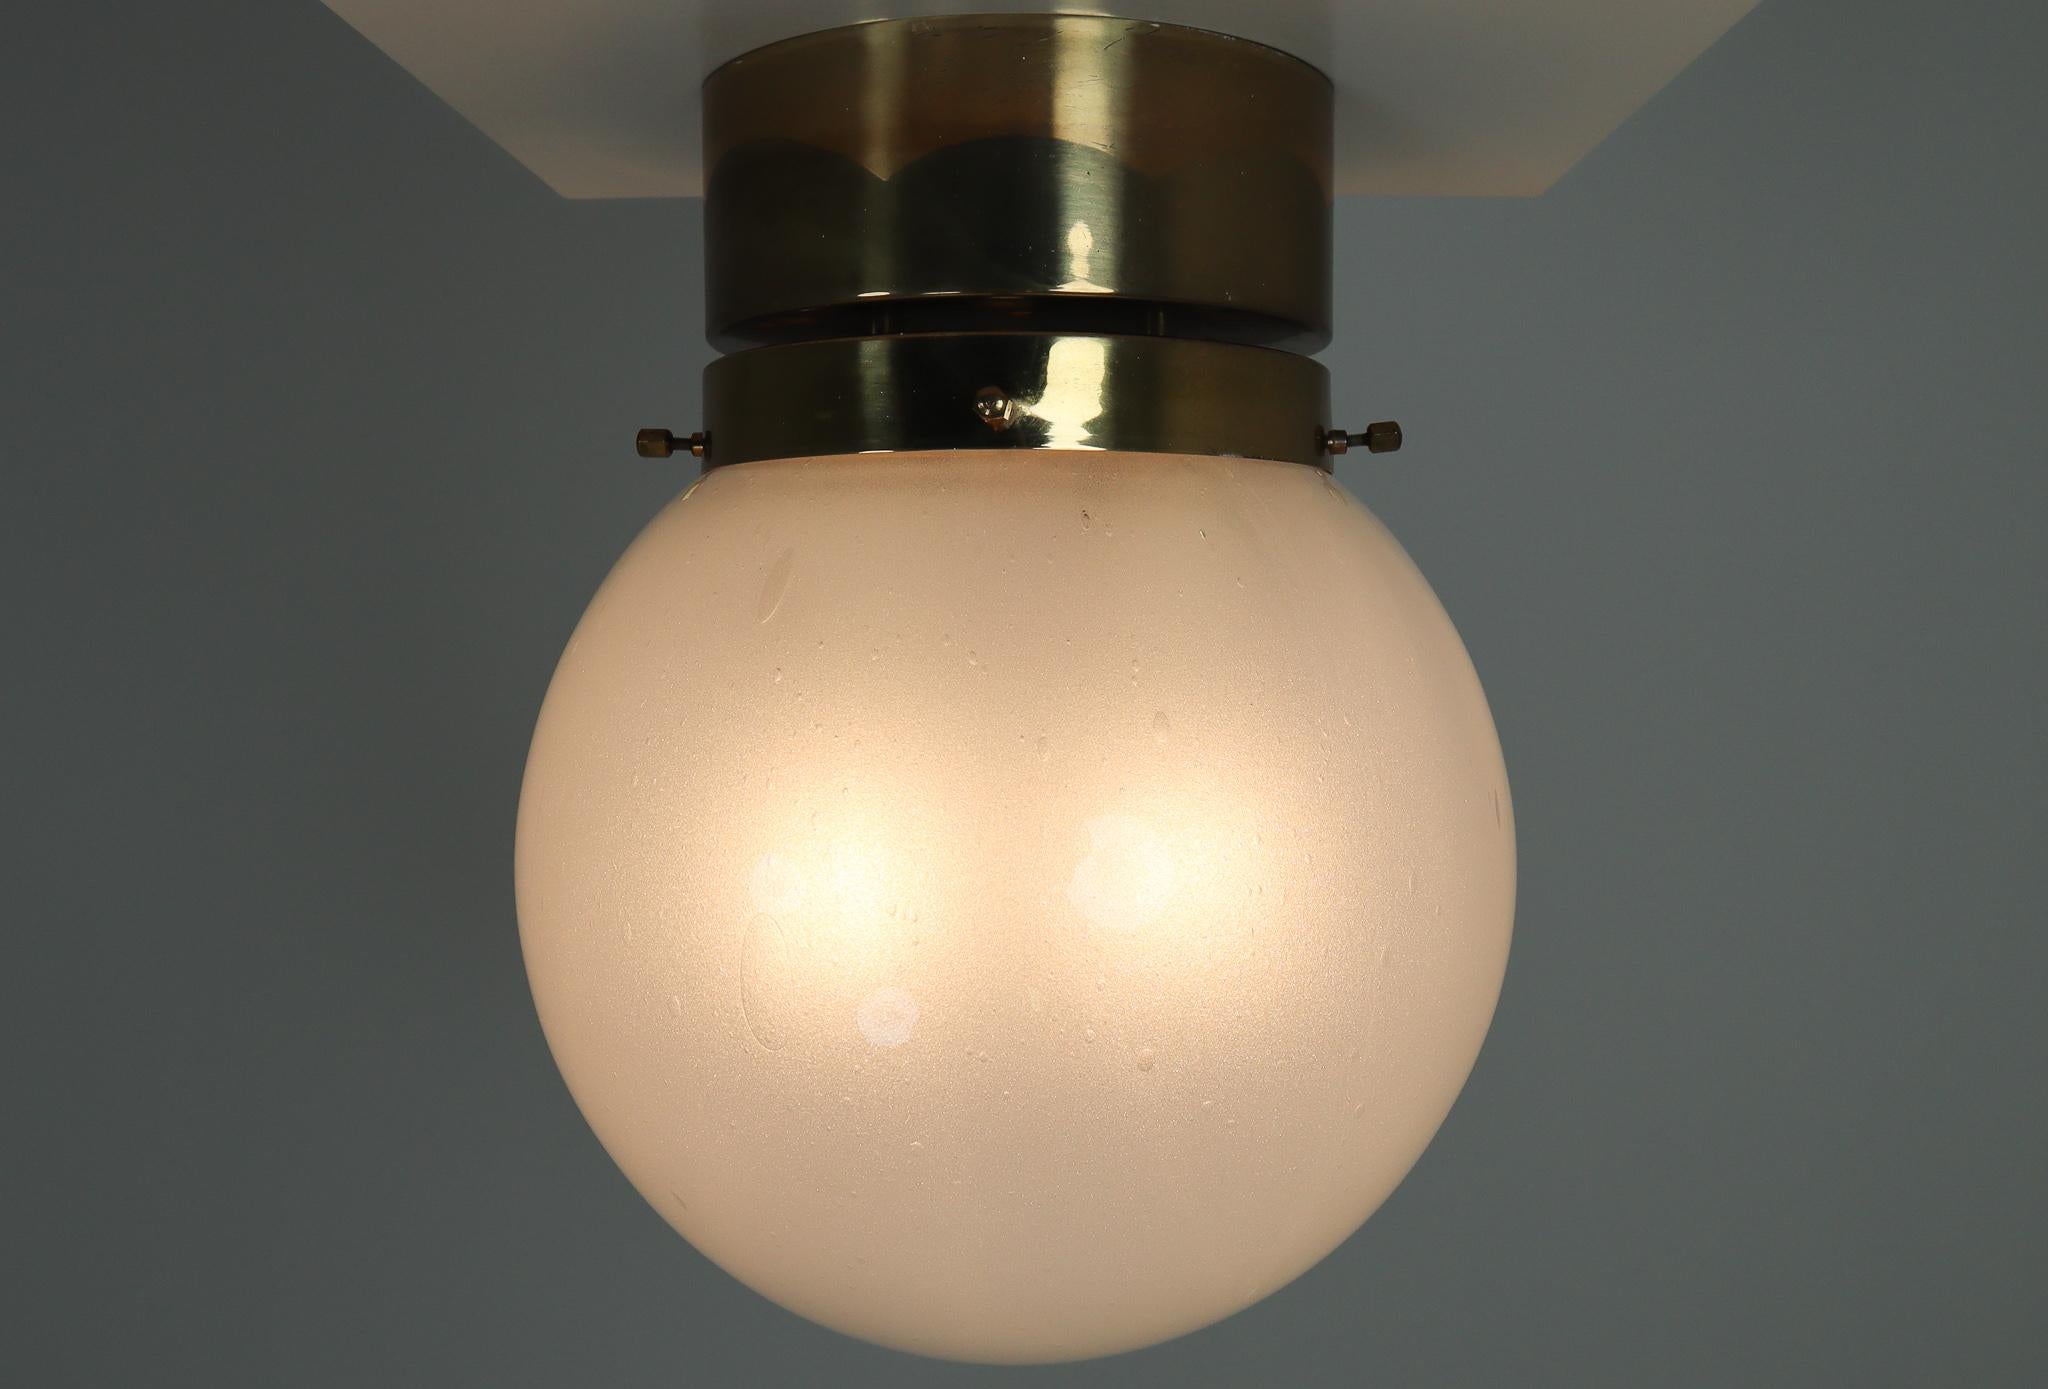 Midcentury Ceiling Light with Brass Frame and White Frosted Glass Globe, 1960s For Sale 2